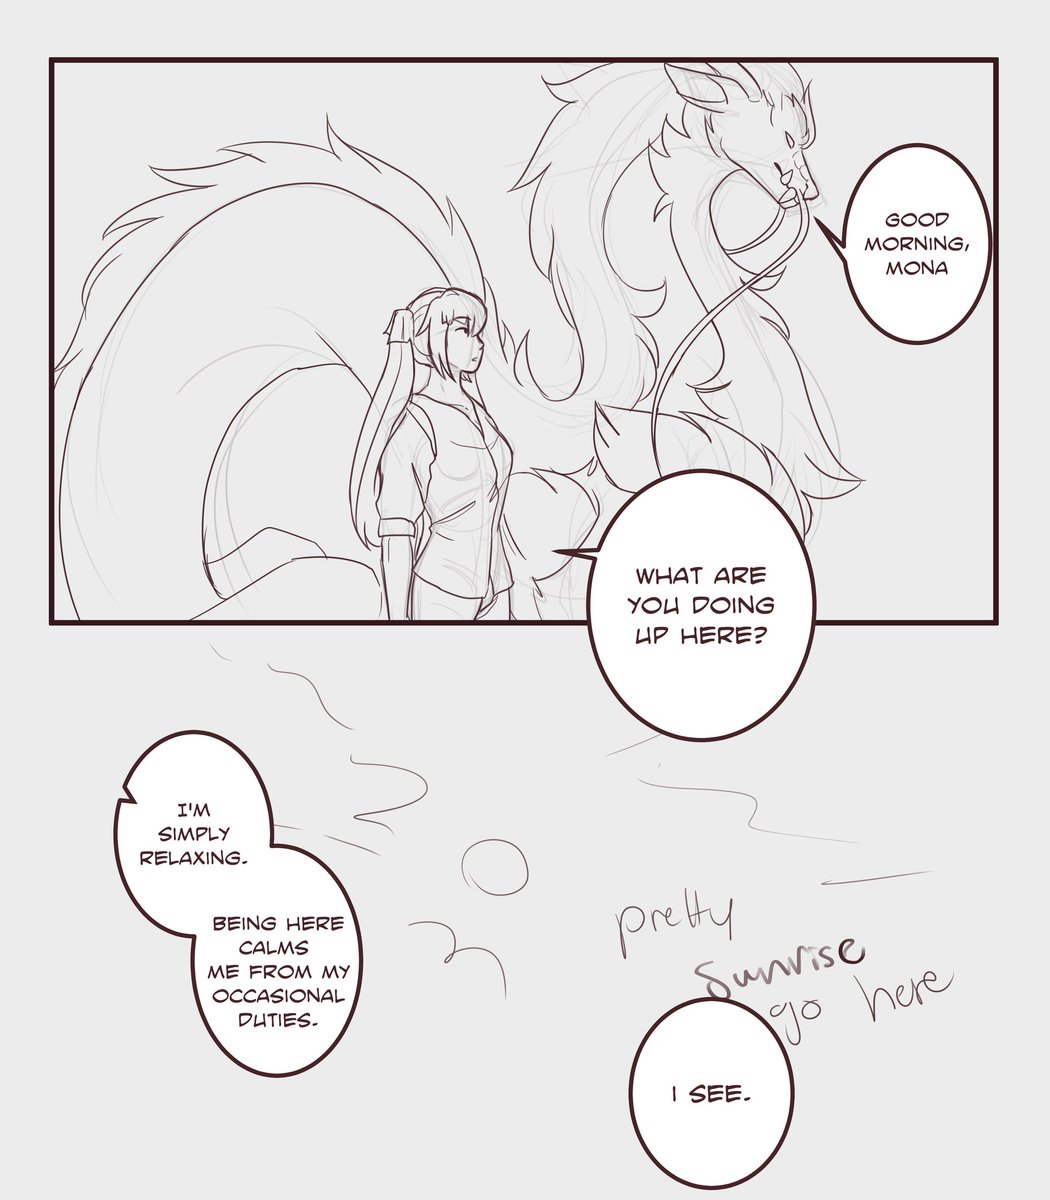 sorry I forgor anyways here's the rest of the moqing dragon au comic I did for the constellations big bang! (2/9)
#原神 #moqing https://t.co/Z9X9oBDZ2R 